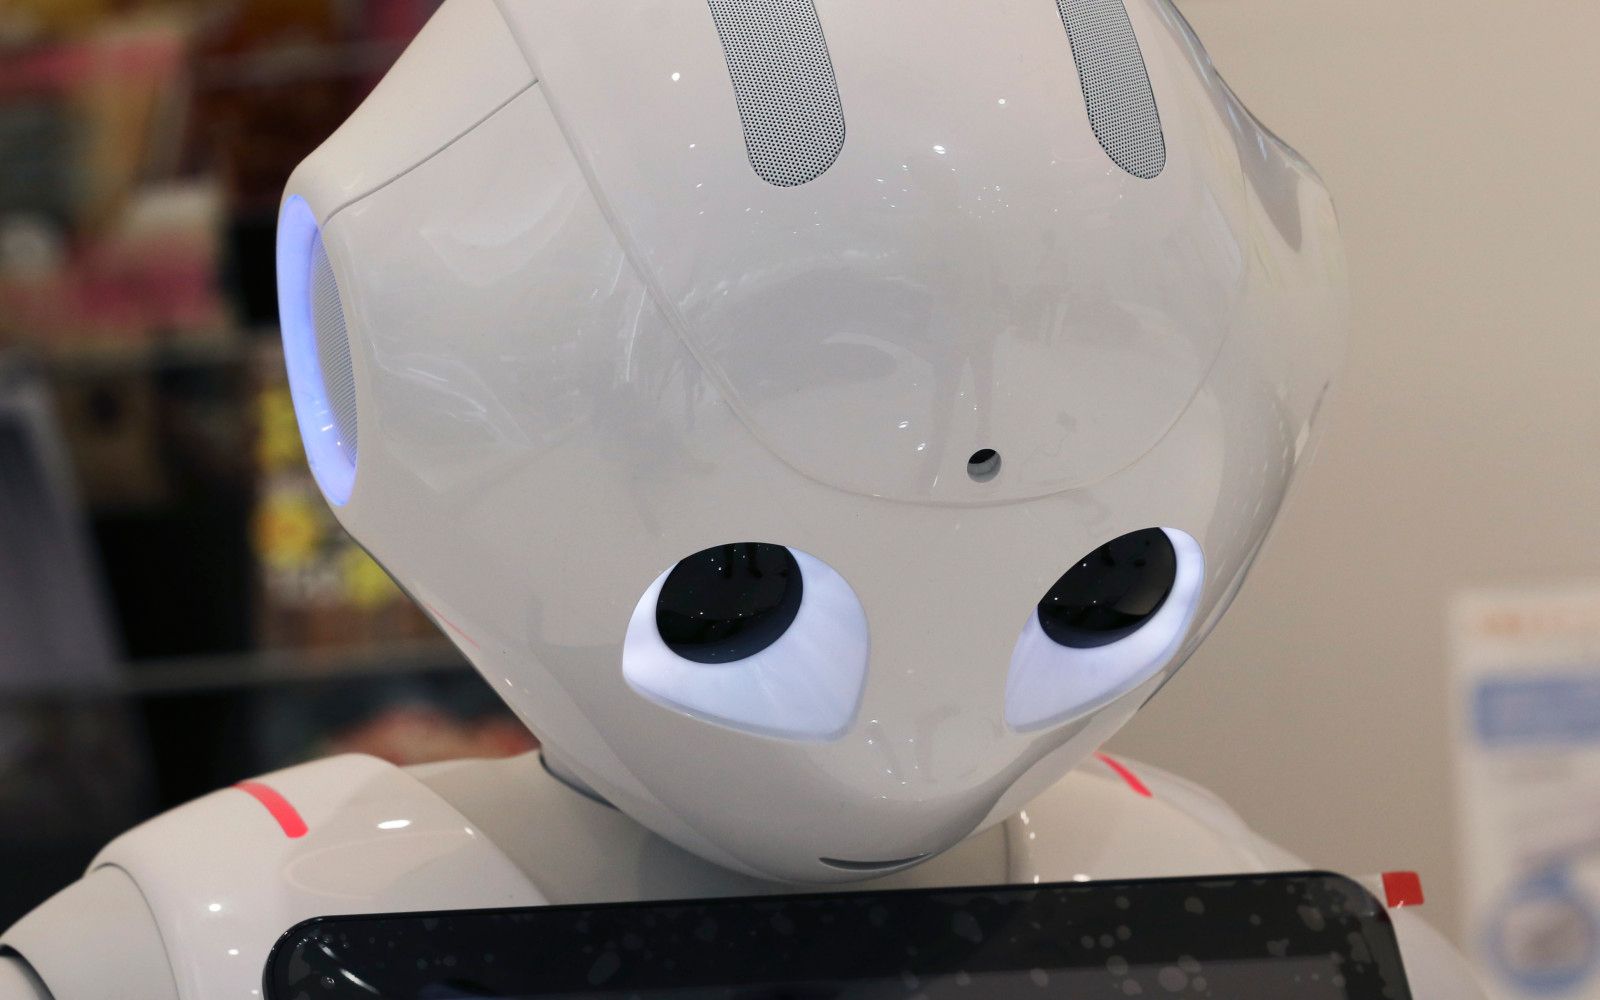 pepper the emotion reading robot that feels sells out in 60 seconds image 1